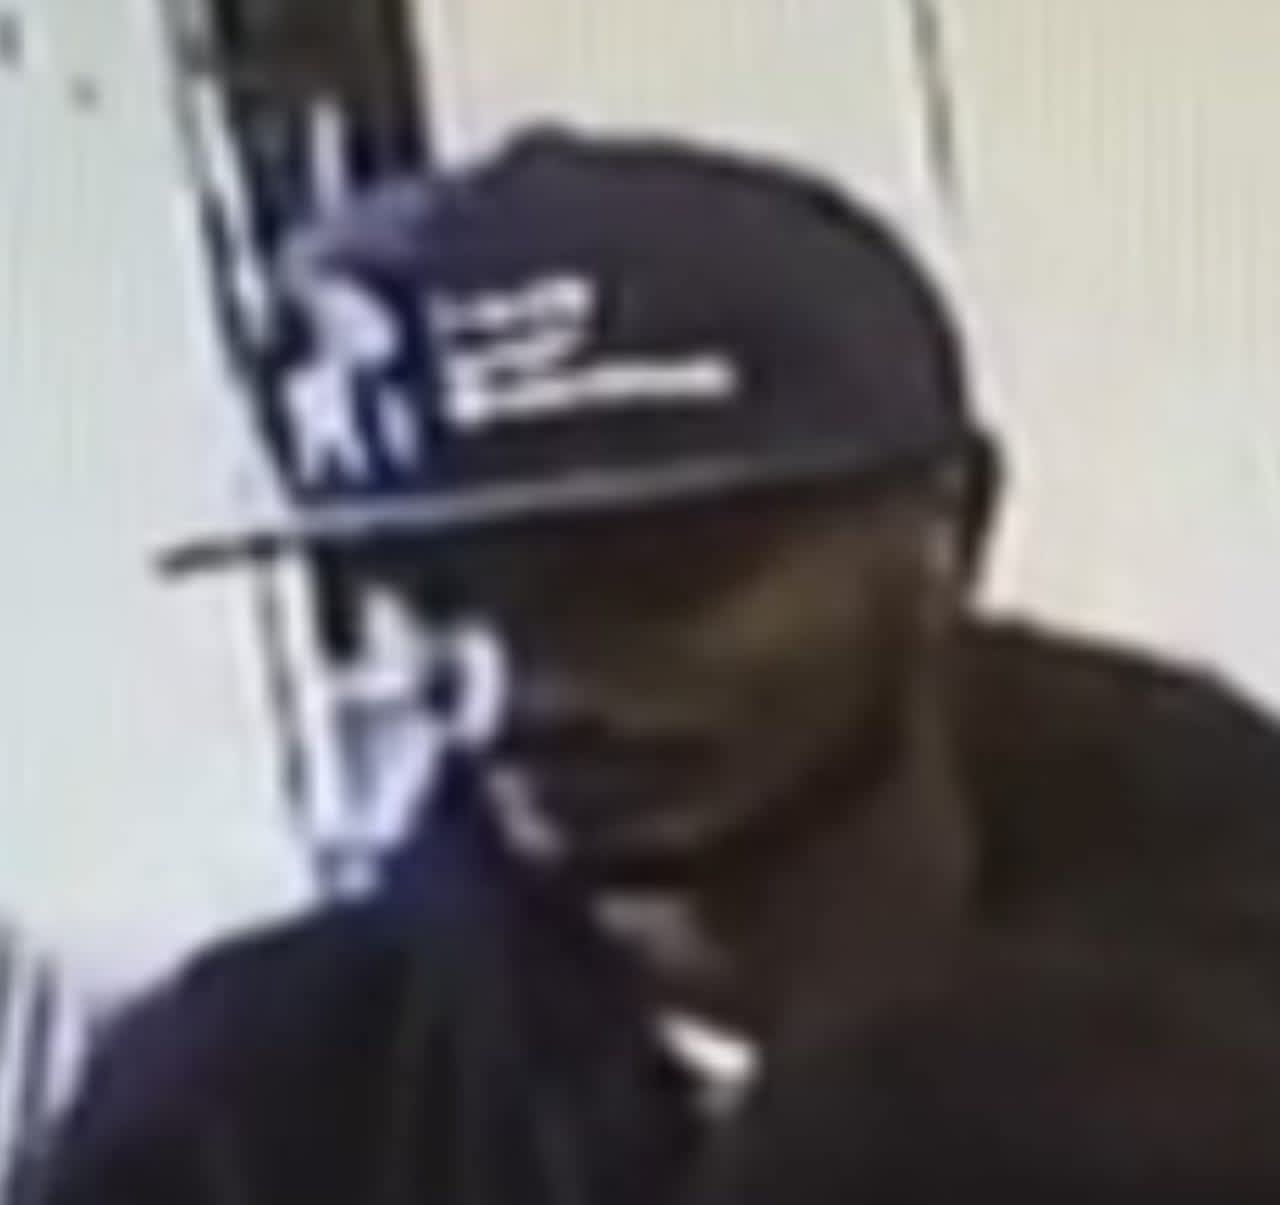 A man is wanted for stealing from a Long Island gas station.